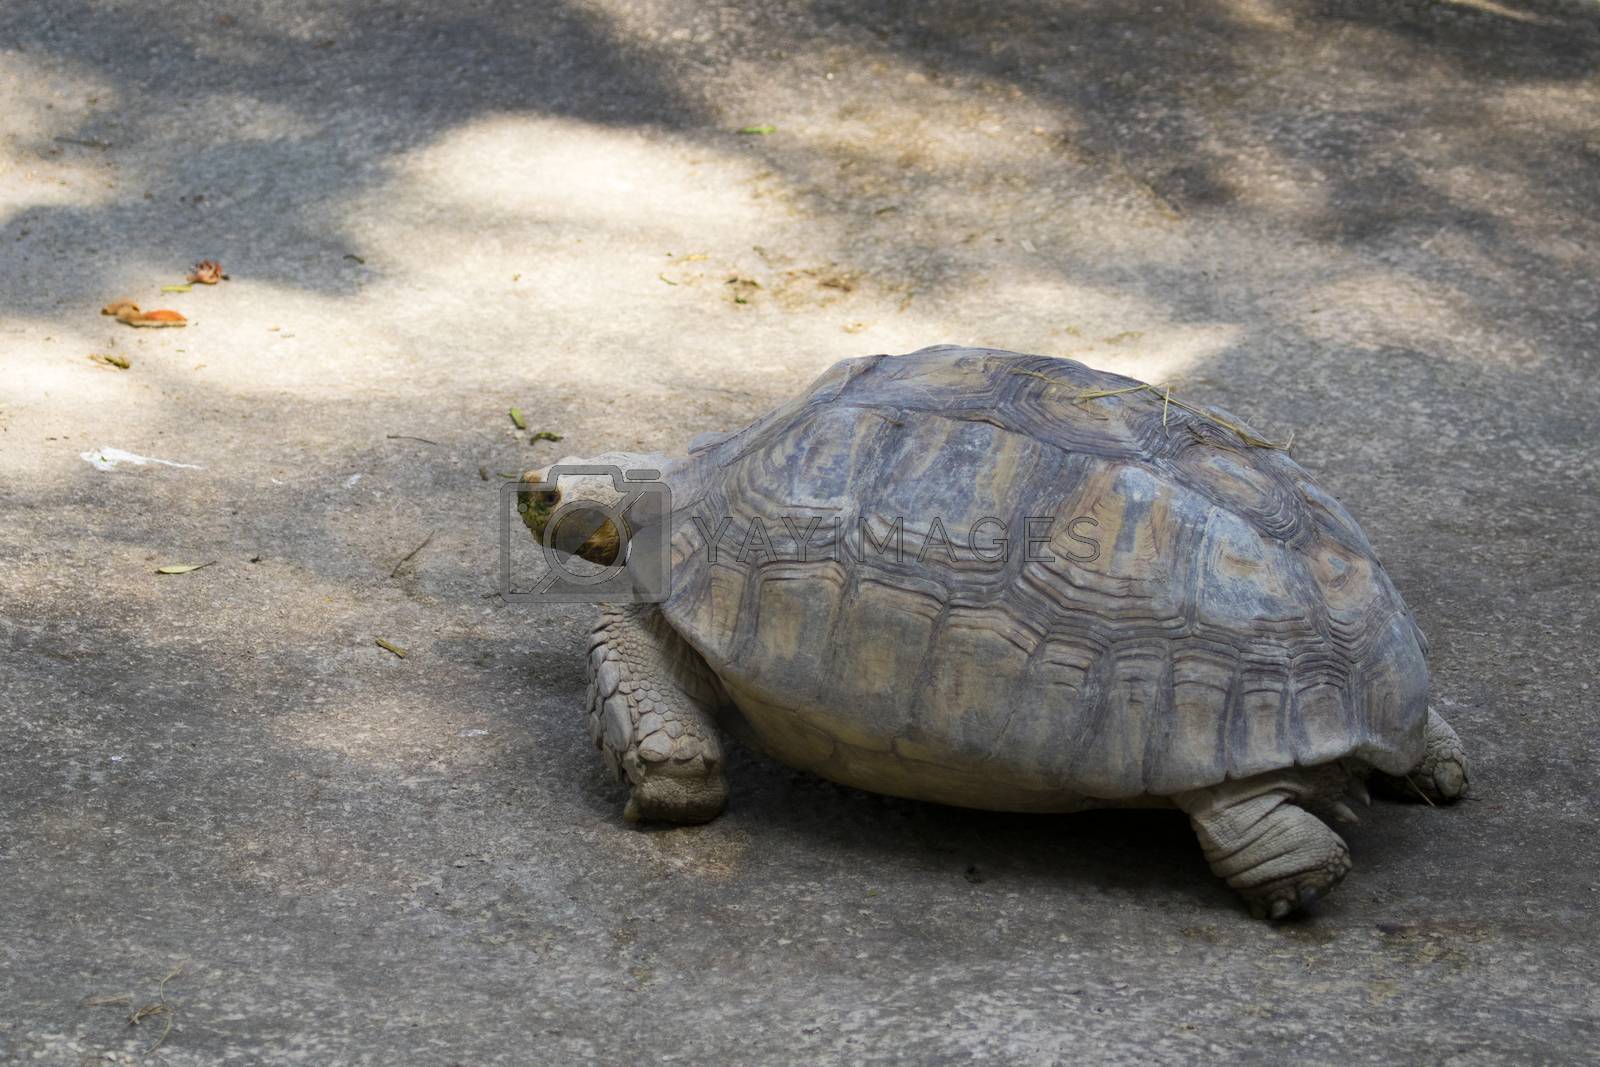 Royalty free image of Image of a turtle on the ground. (Geochelone sulcata) Reptile. by yod67